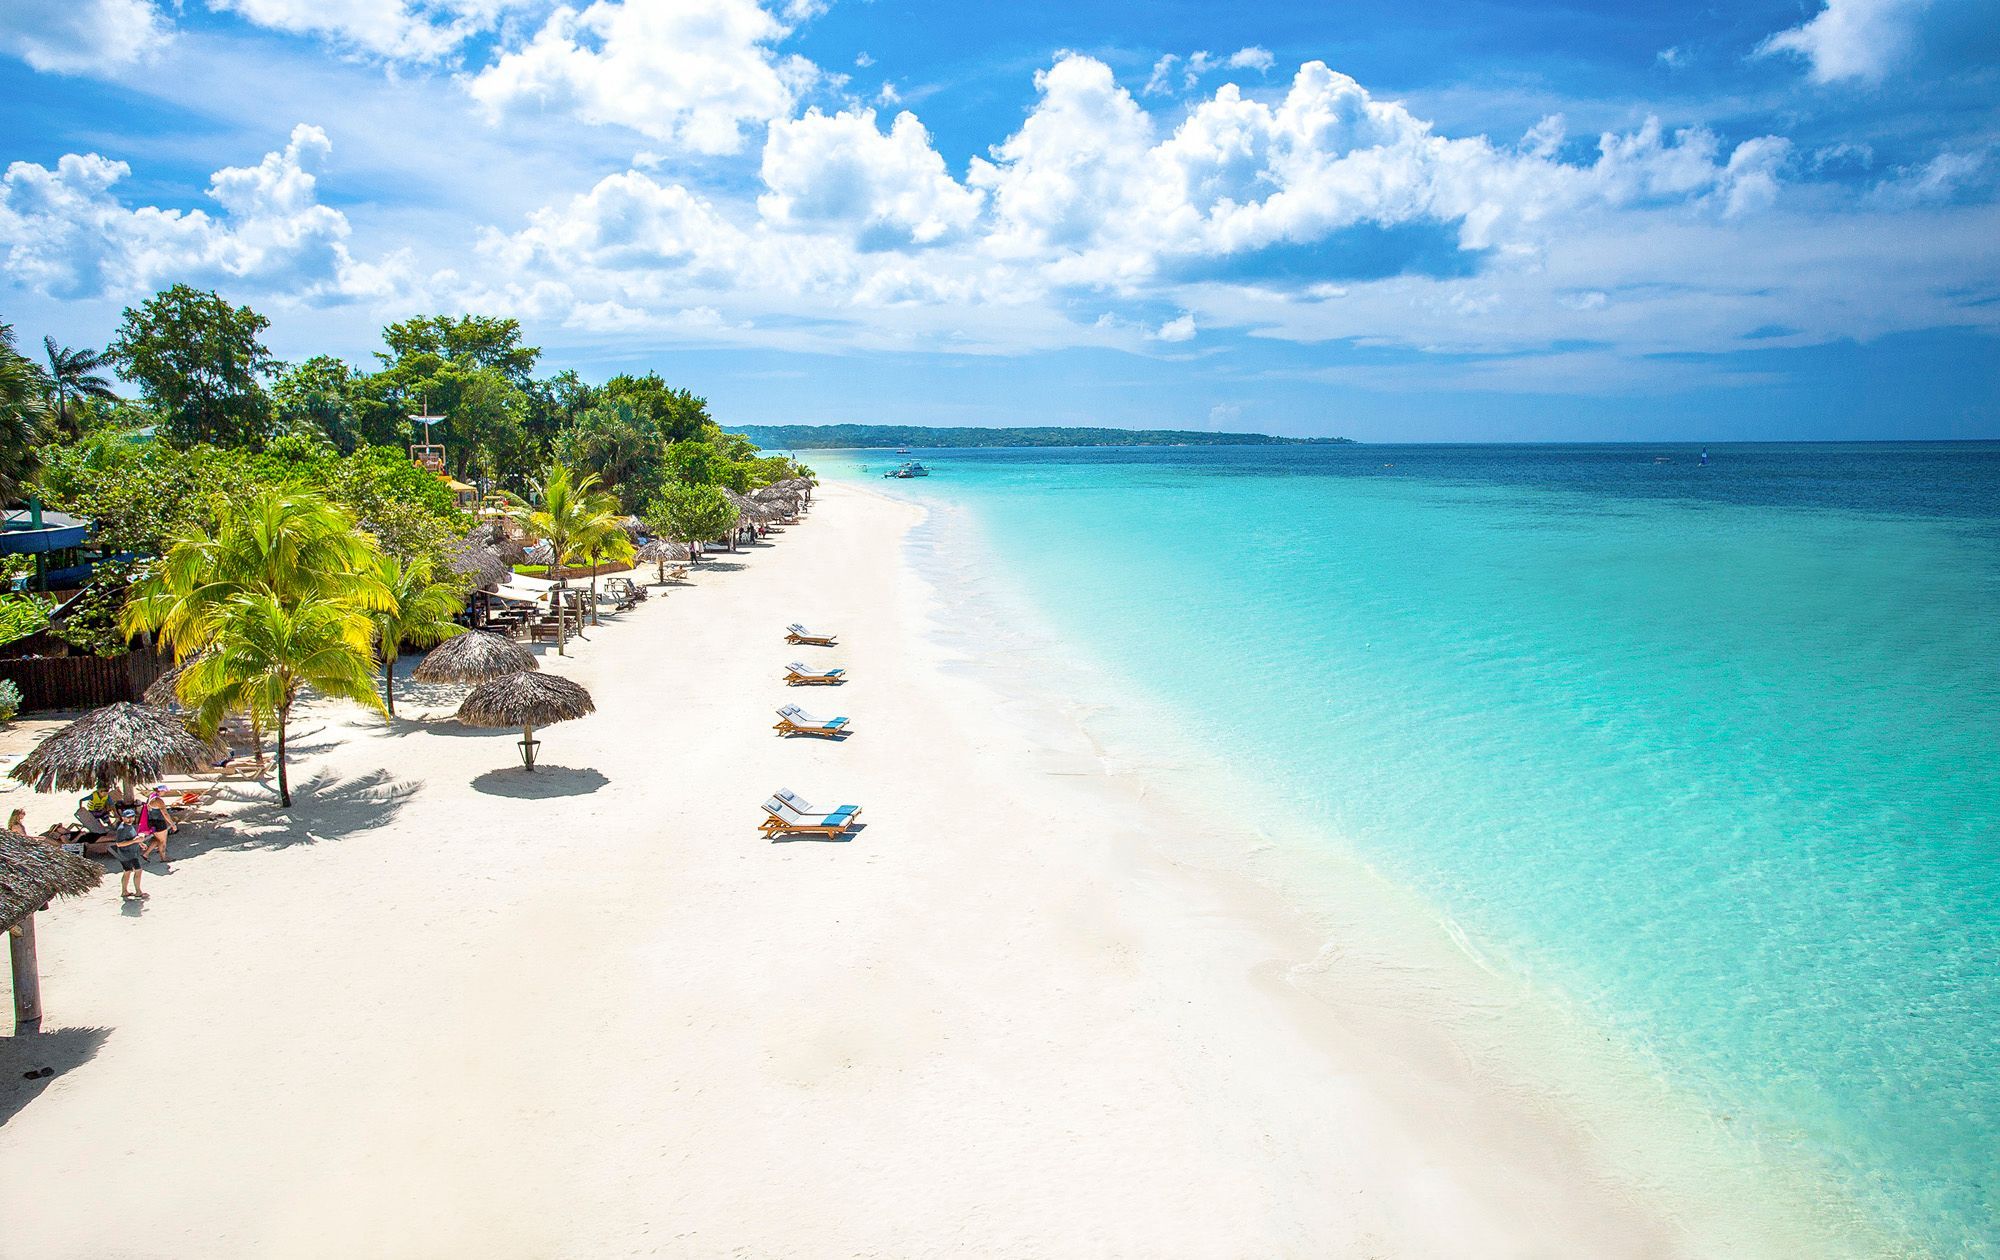 Sandals Vs. Beaches: How to Choose the Best All-Inclusive for You (2022)